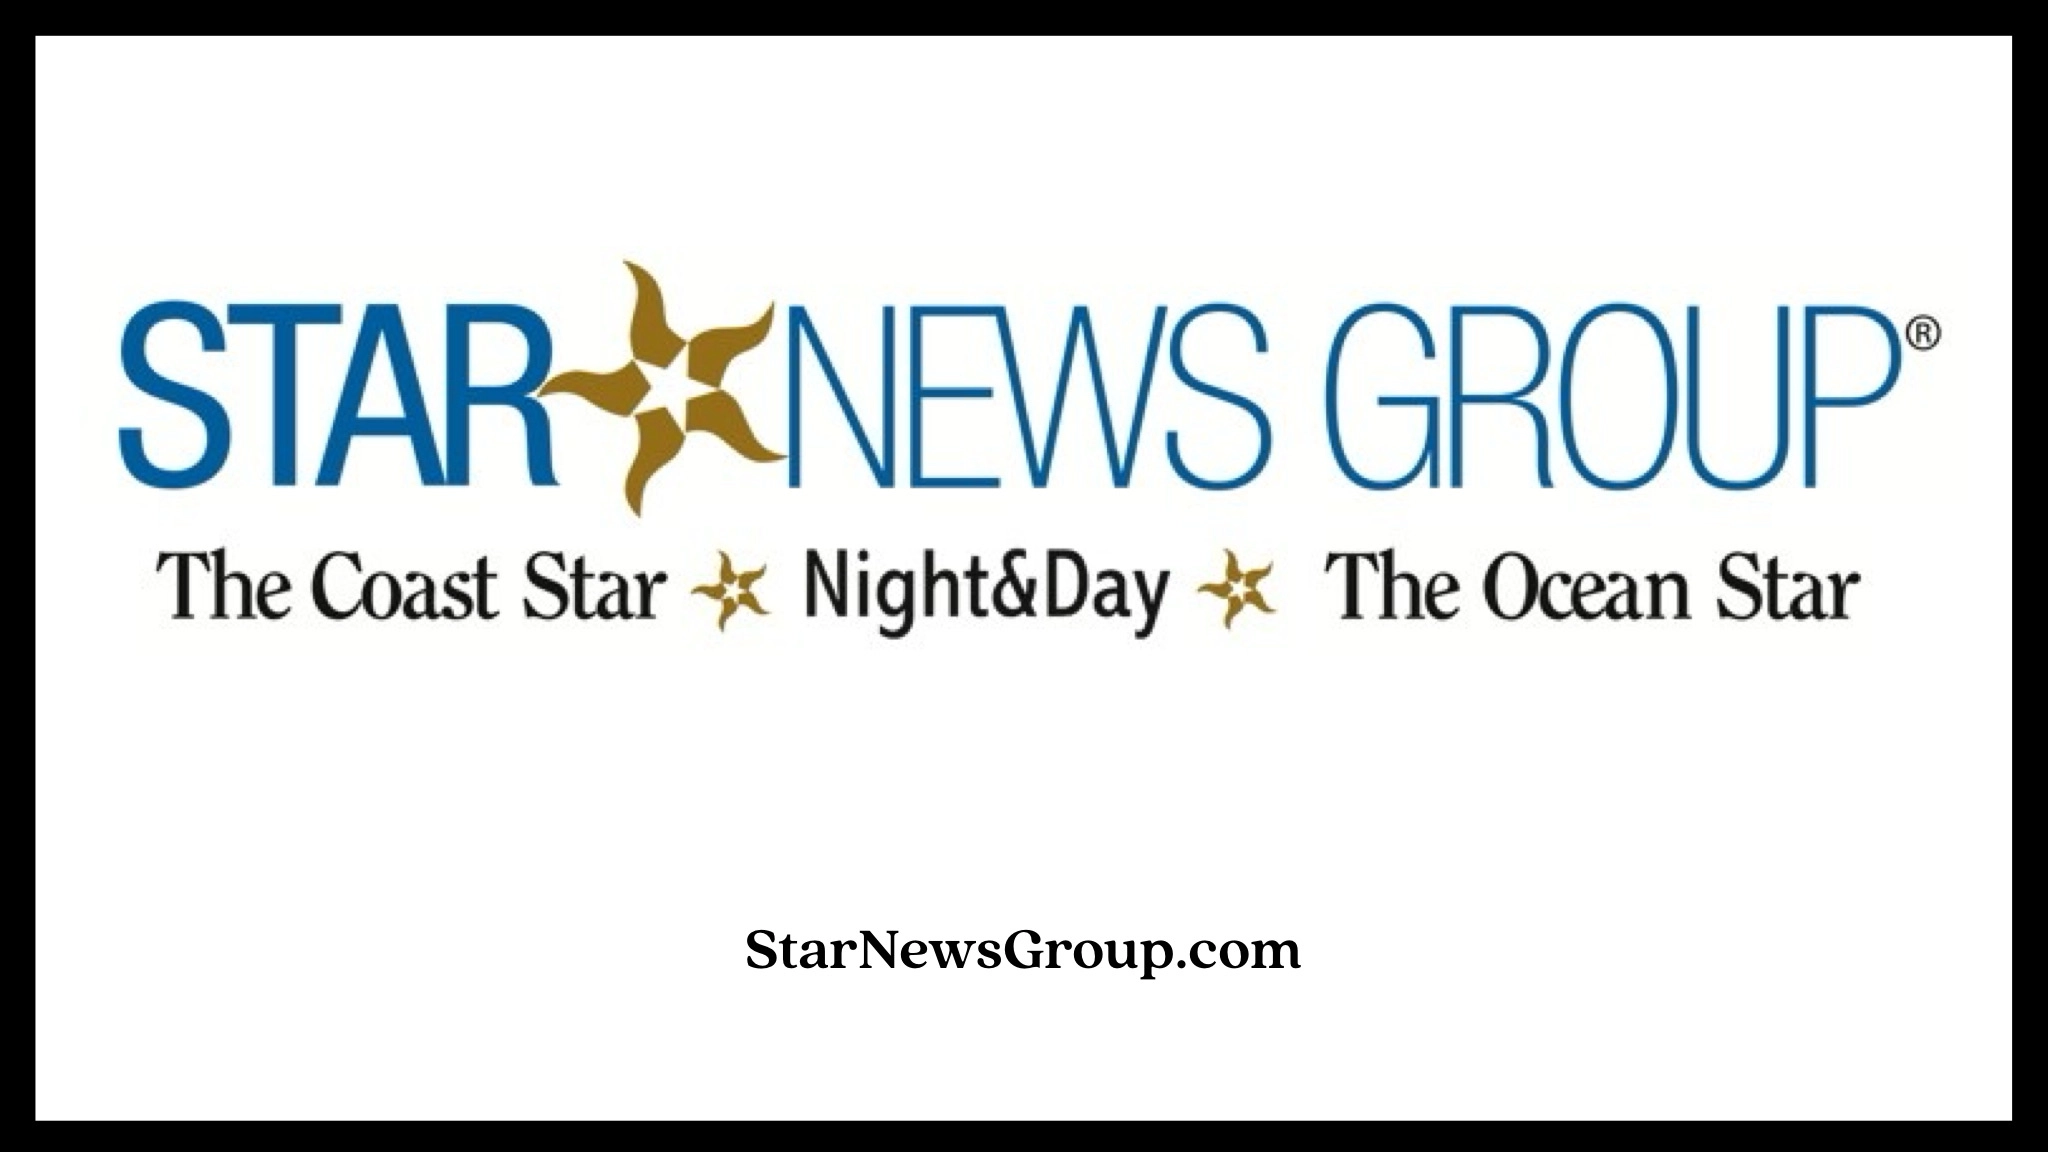 Star News Group Graphic